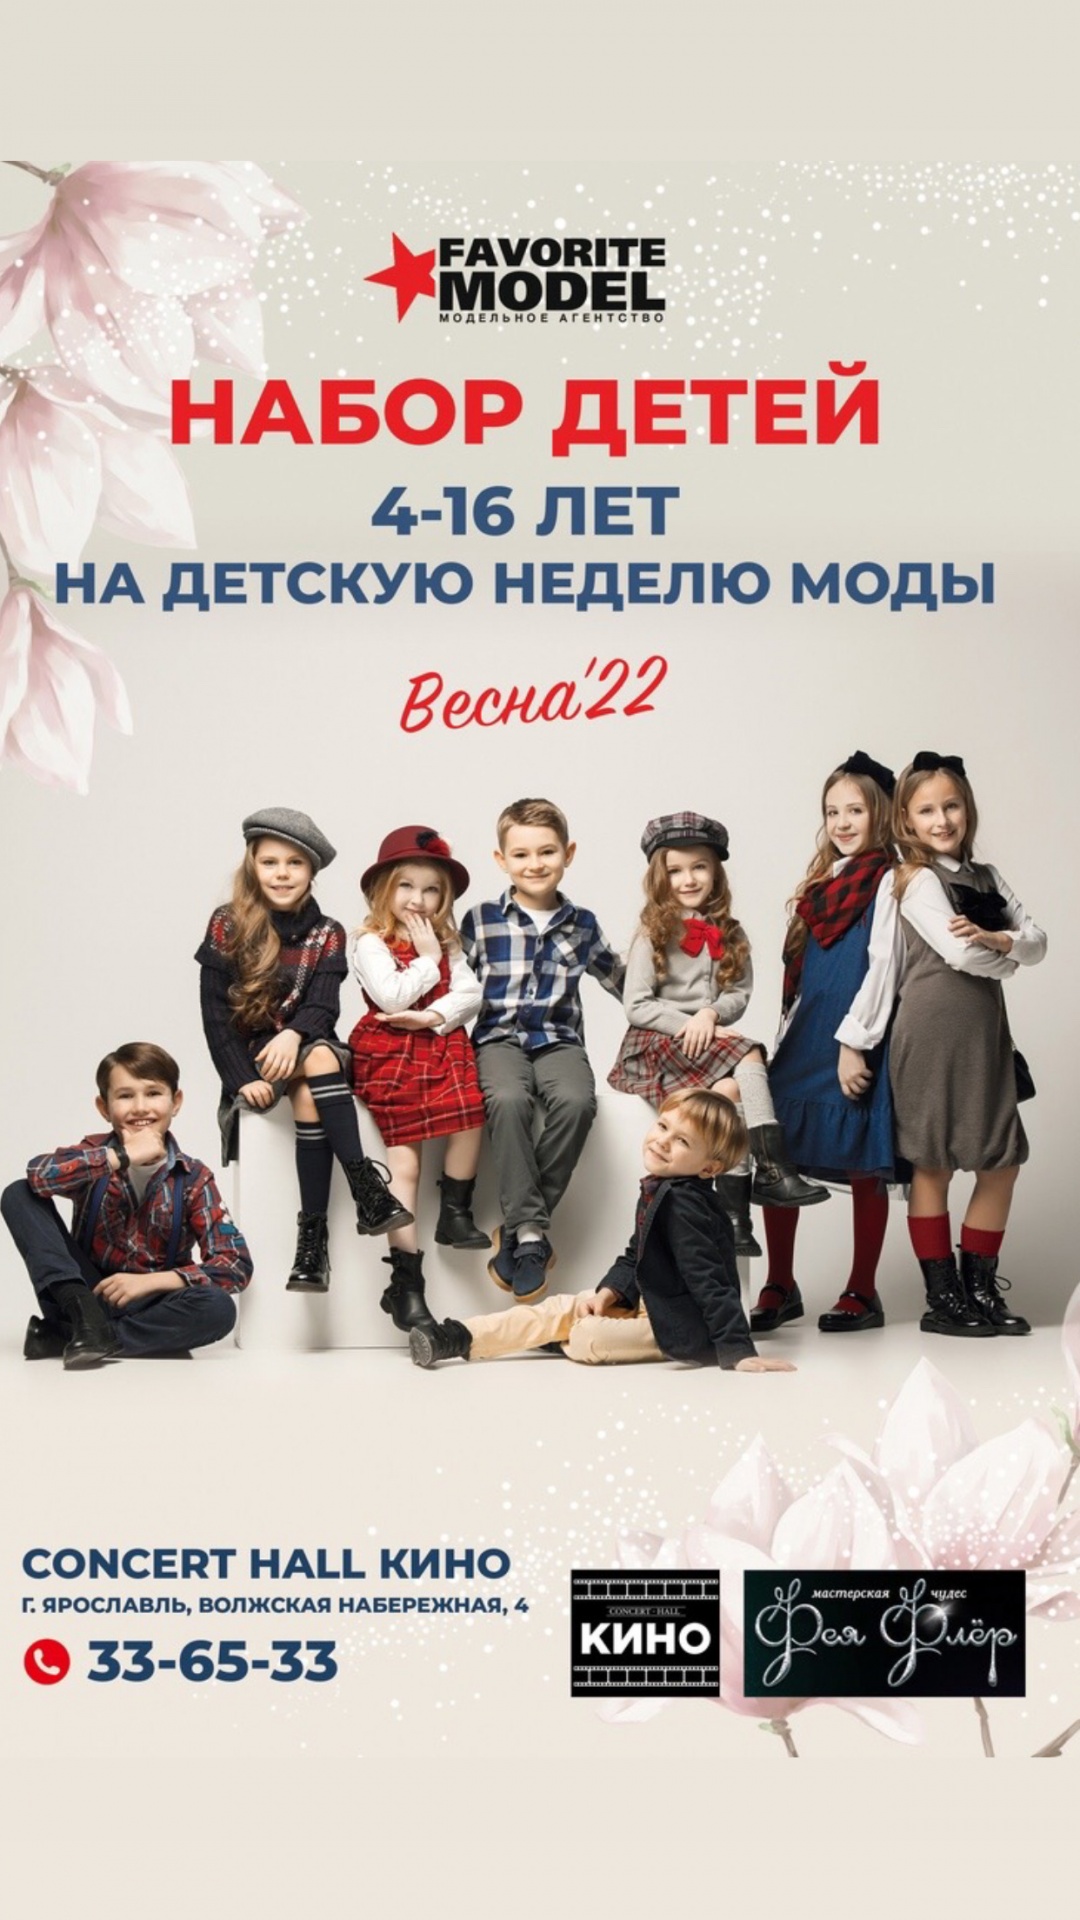 The modeling agency "Favorite model" announces a set of children aged 4 to 16 years old to participate in the most fashionable project of spring "Children's Fashion Week Spring"